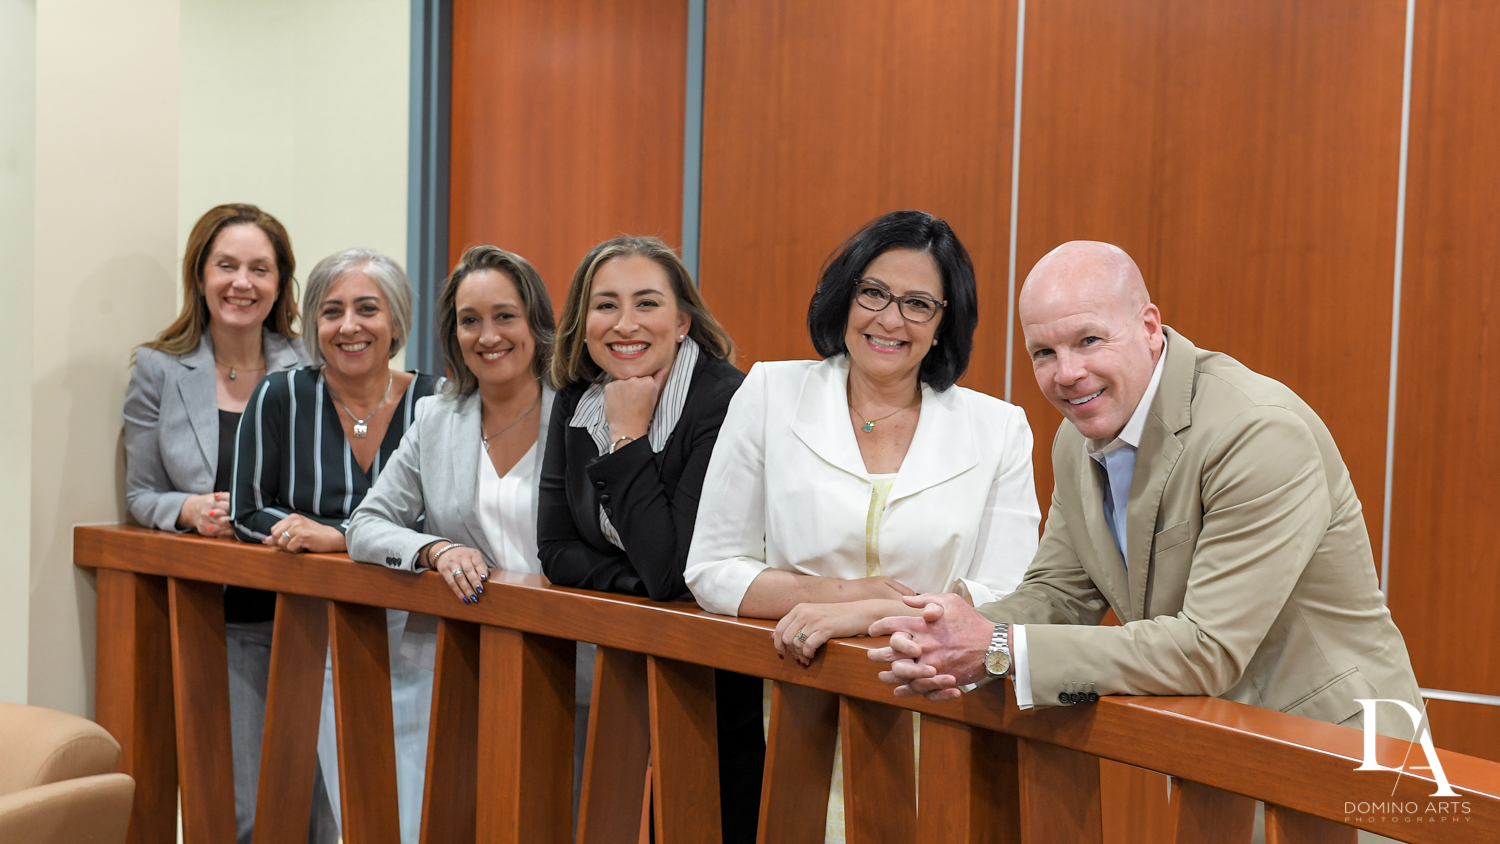 Staff pictures at Corporate Photography Power Financial Credit Union in Pembroke Pines